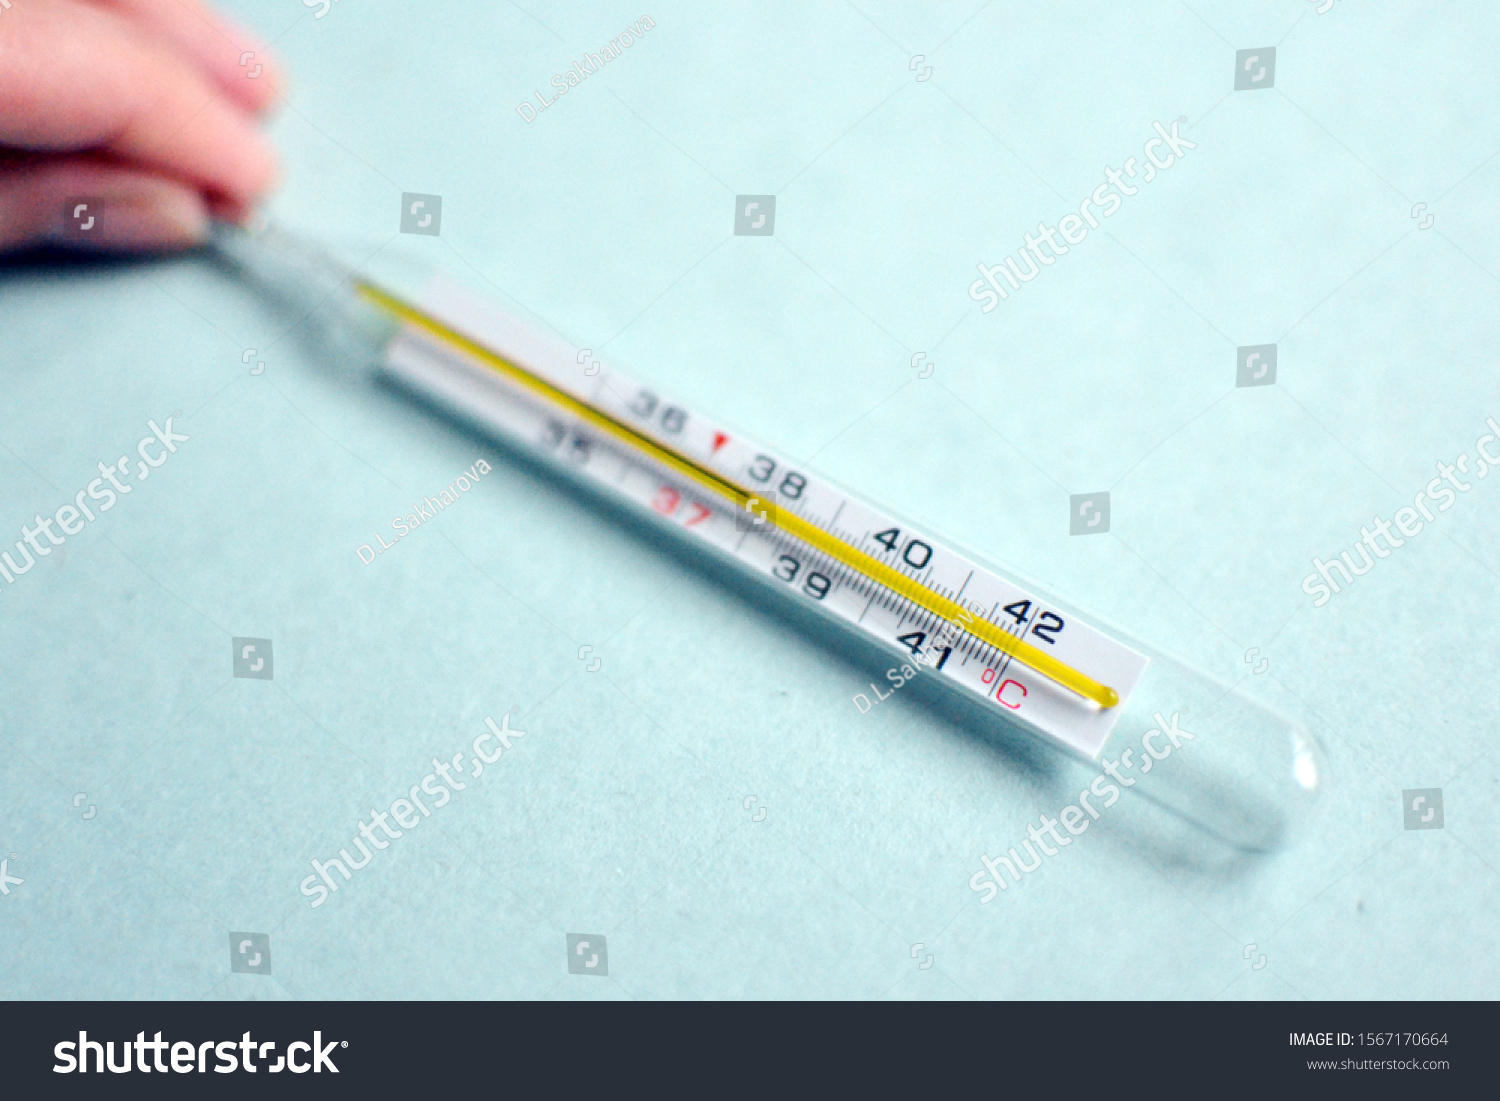 Mercury thermometer. Heat. Illness, flu, colds. Cold season. Glass thermometer. Degrees Celsius. #1567170664